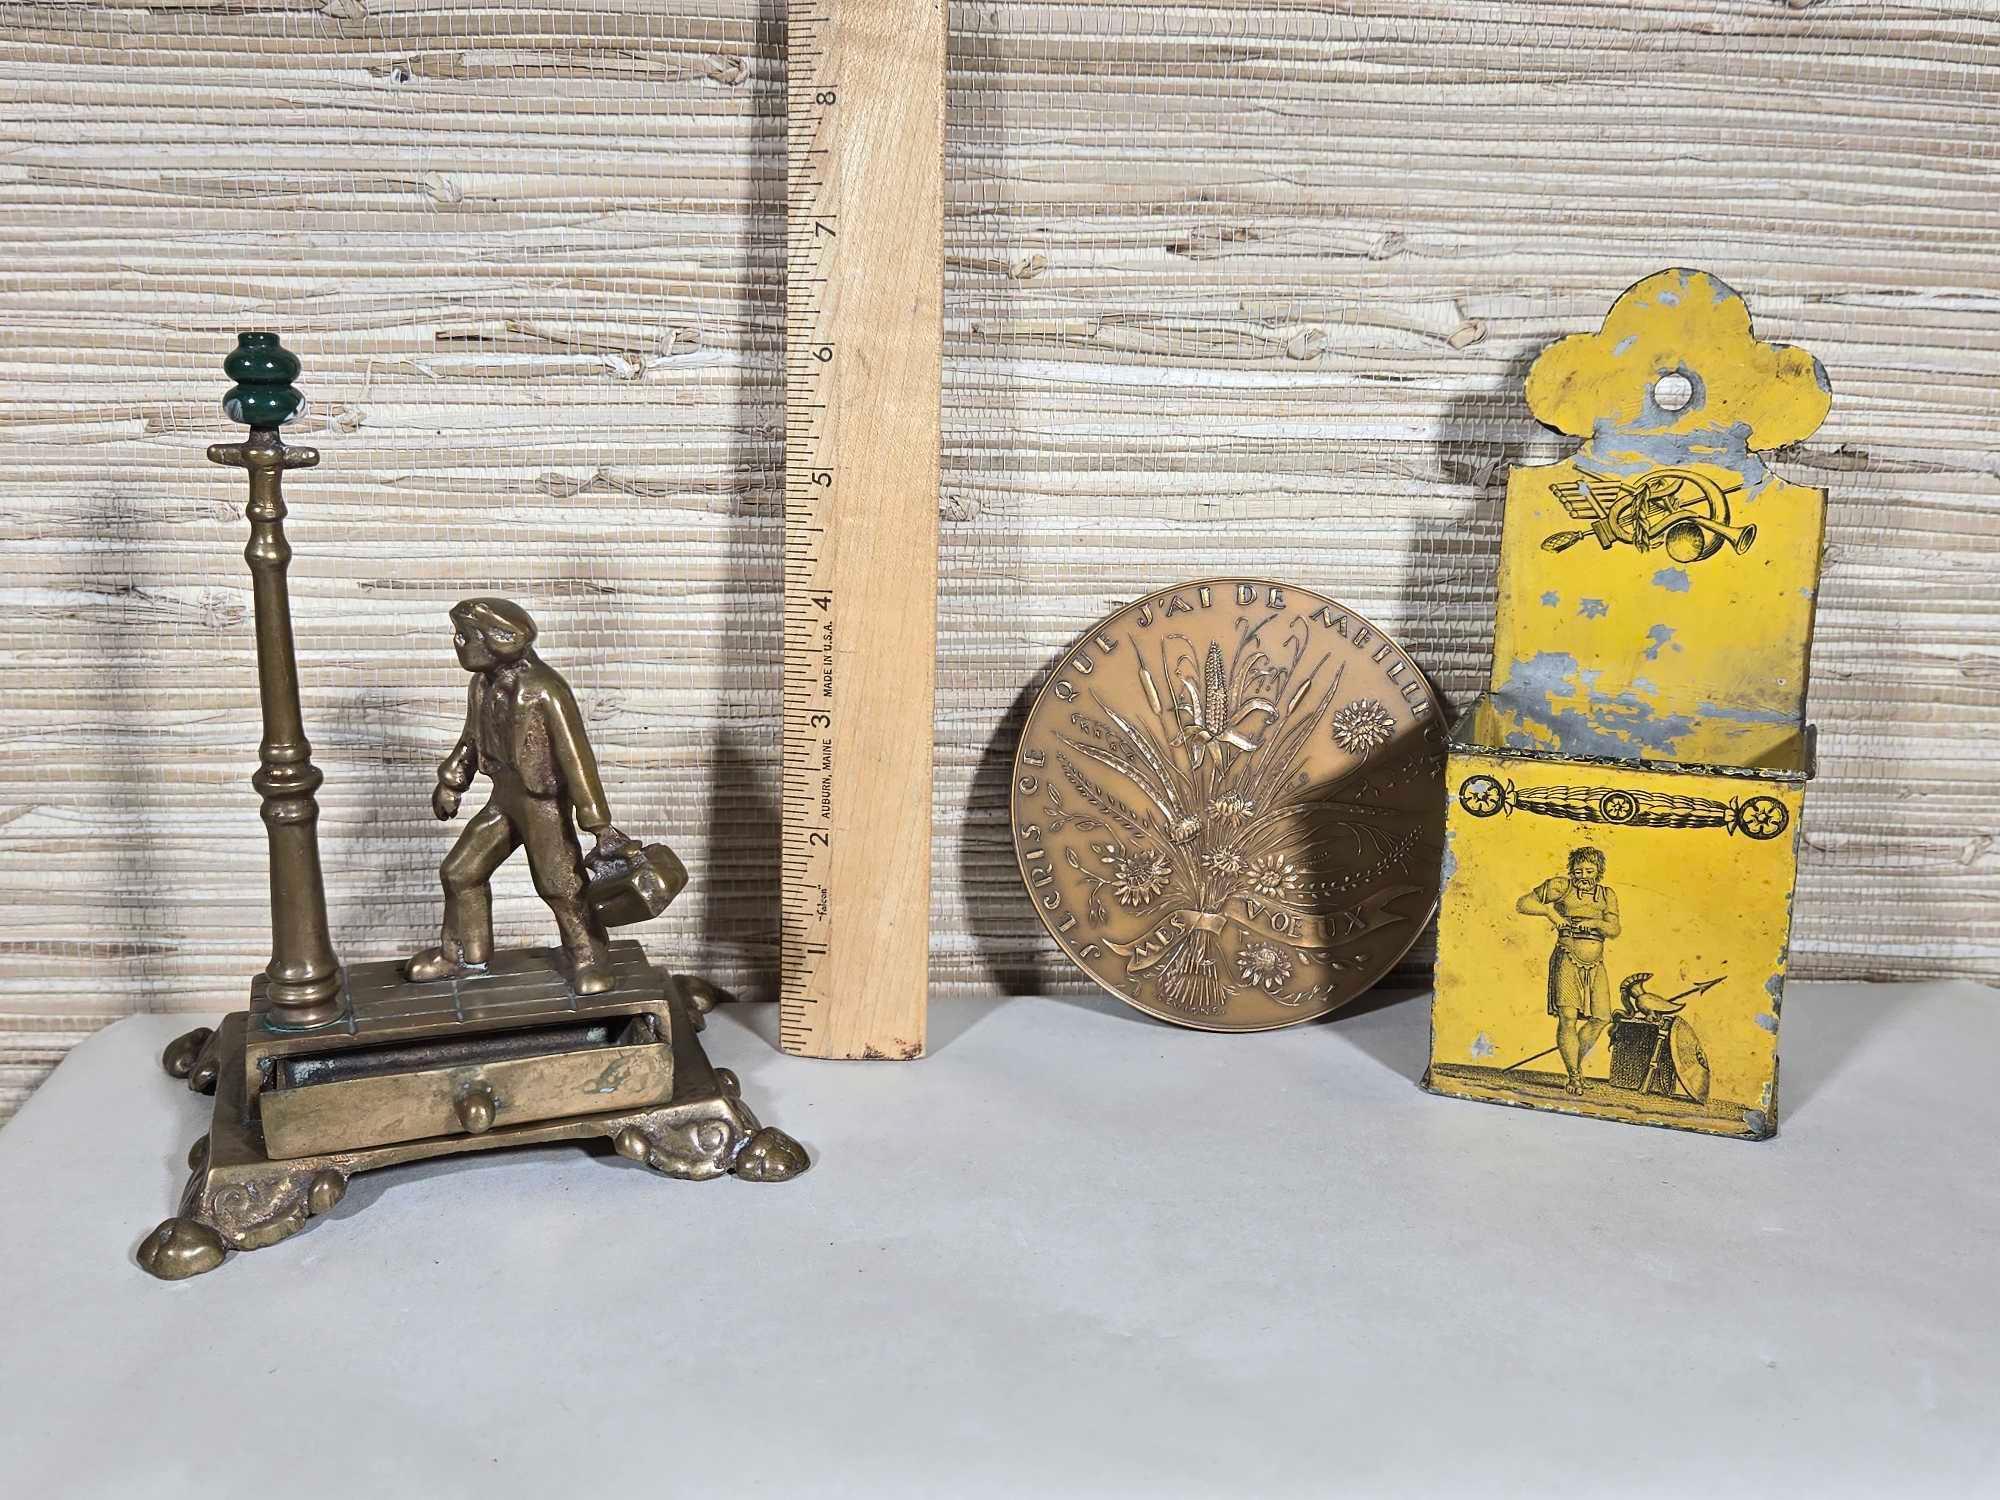 Estate Collection of Vintage Metal Ware Incl. Bookends, Bird Statues, & More